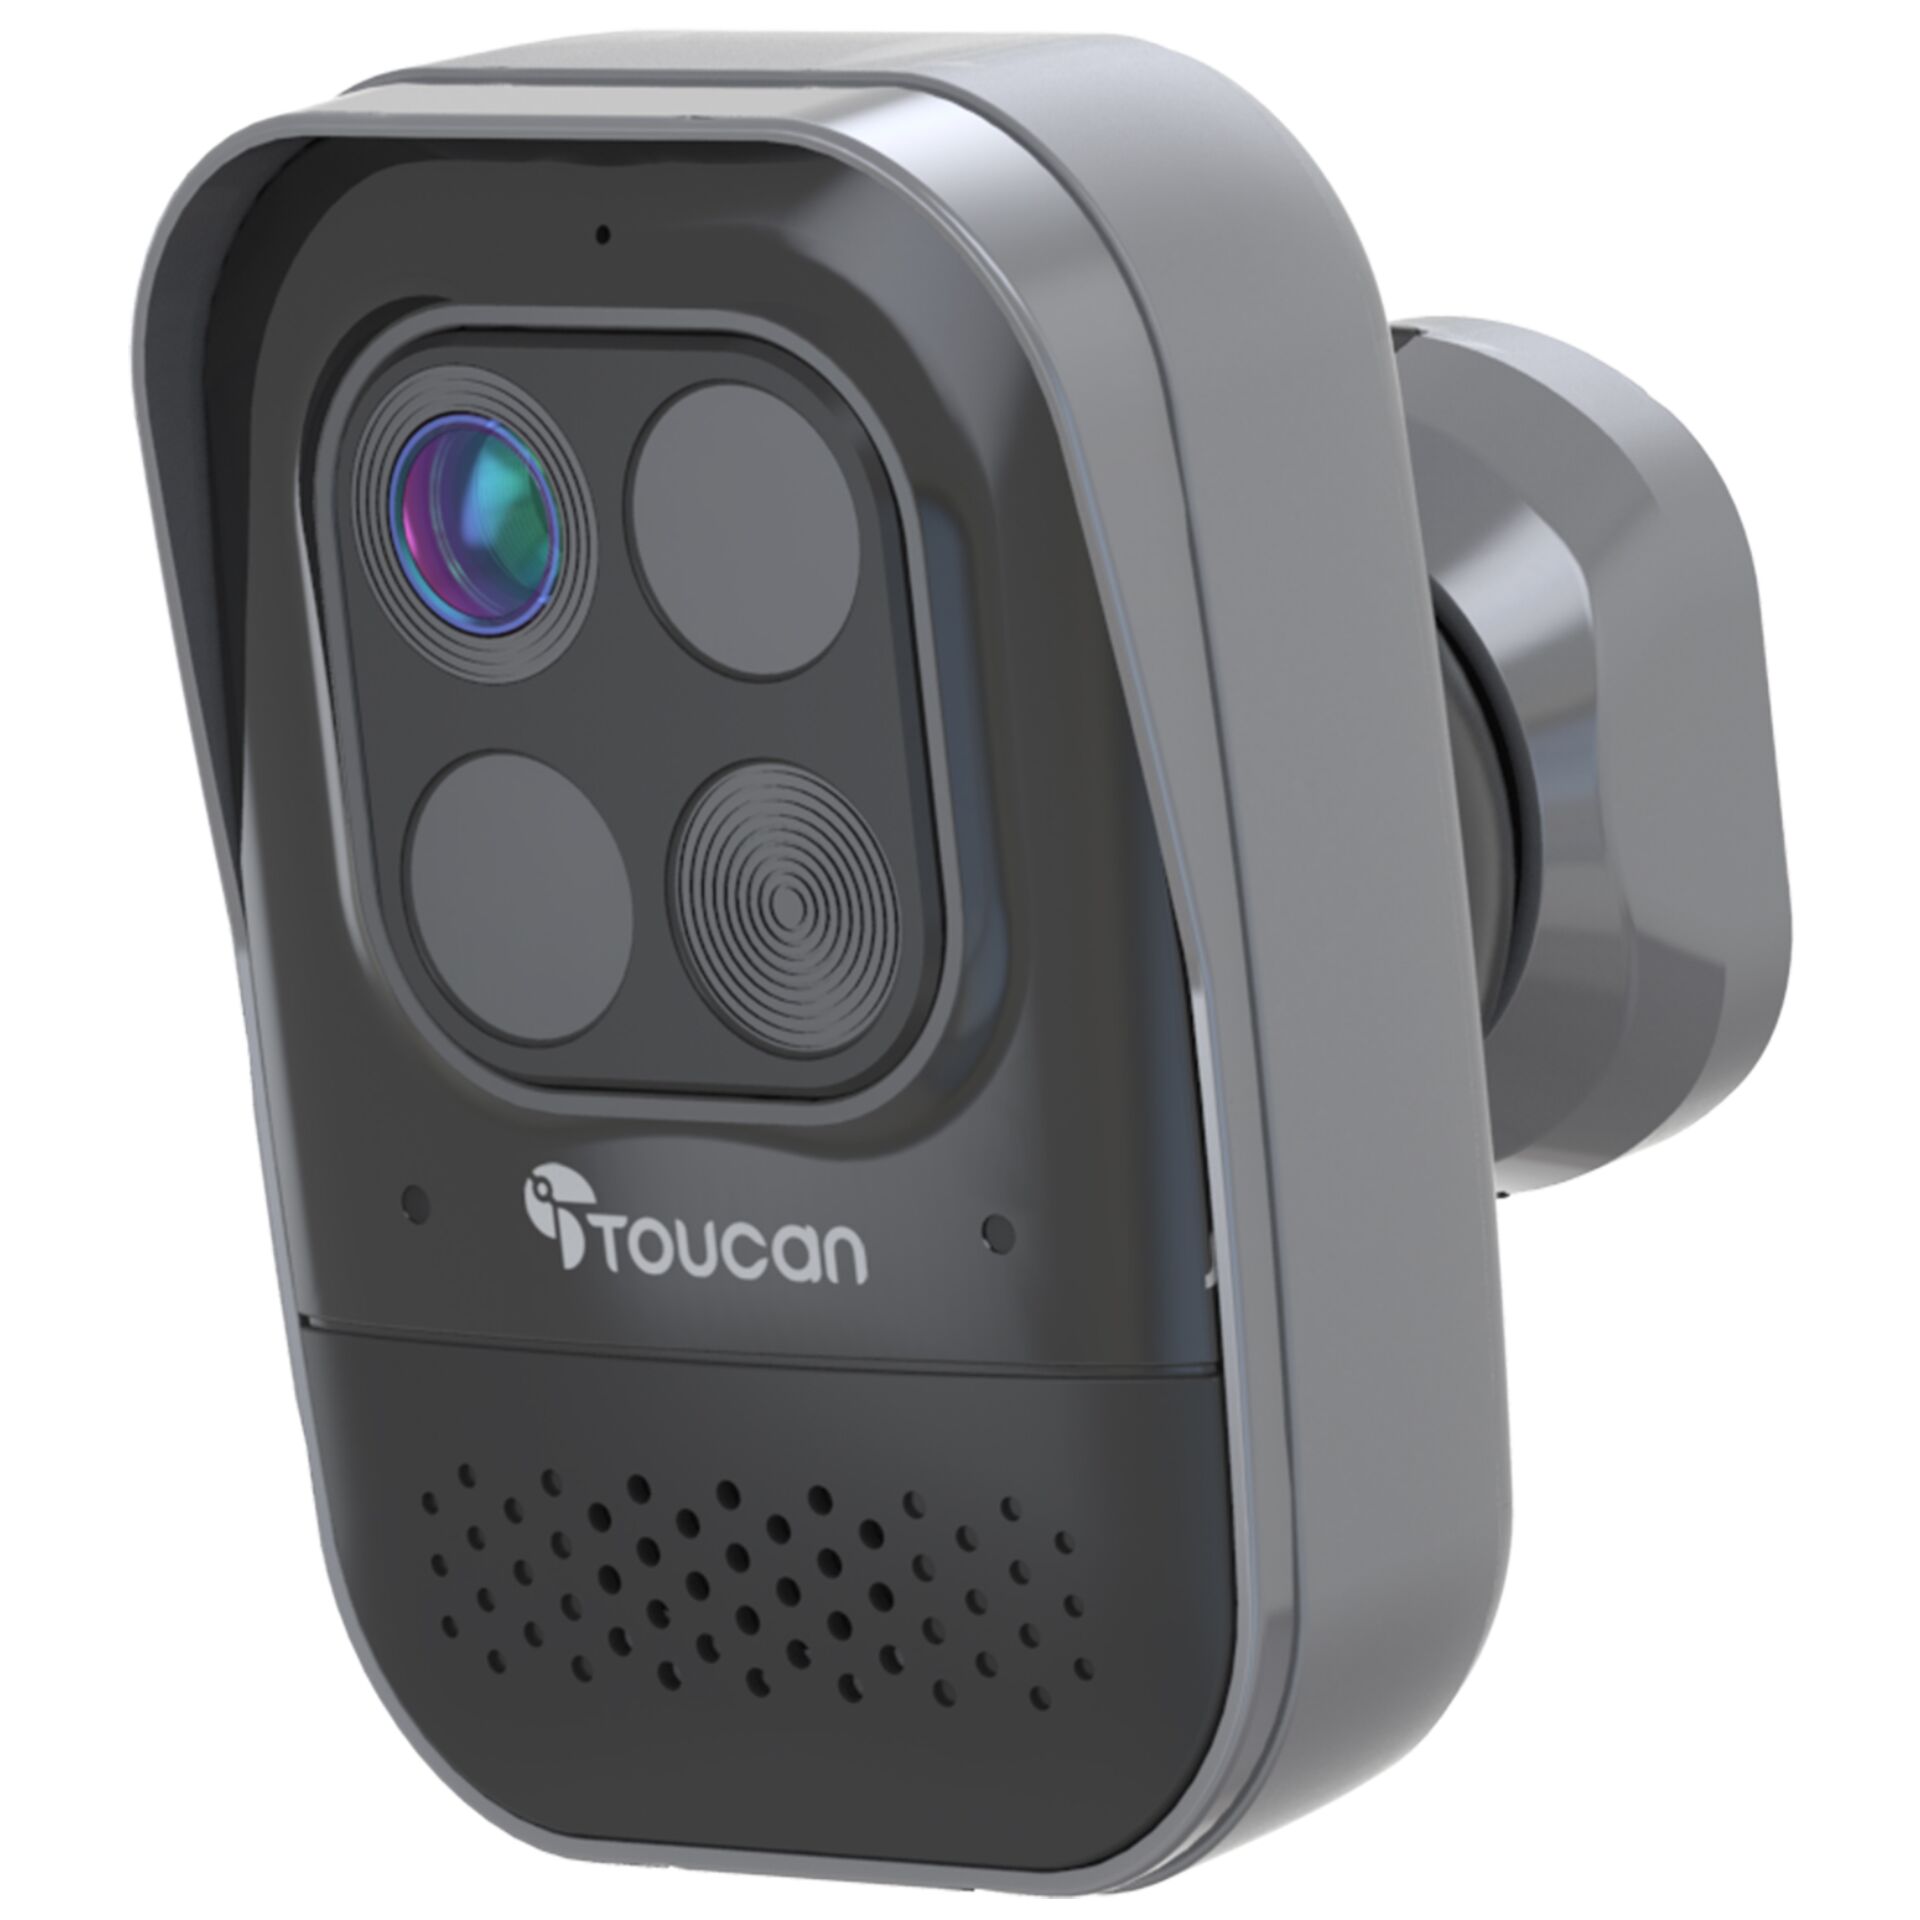 Toucan Wireless Security Camera PRO with Radar Motion Detect